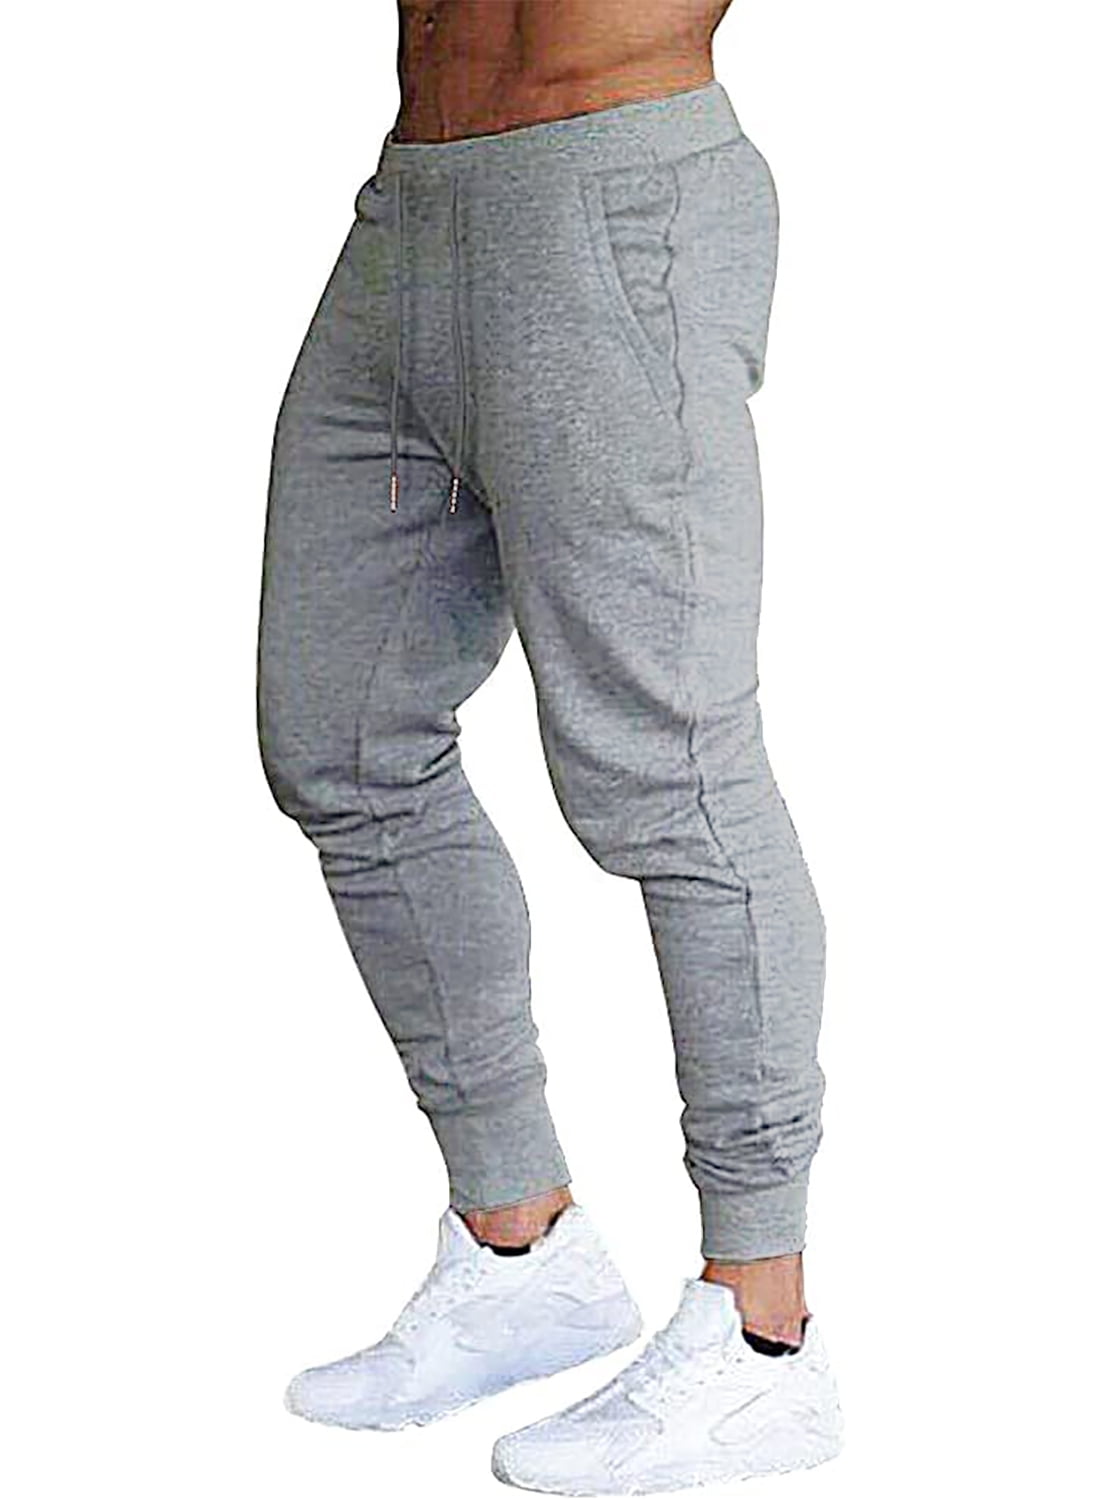 Hood Crew Men's Slim Joggers Workout Pants for Gym Running and Body ...